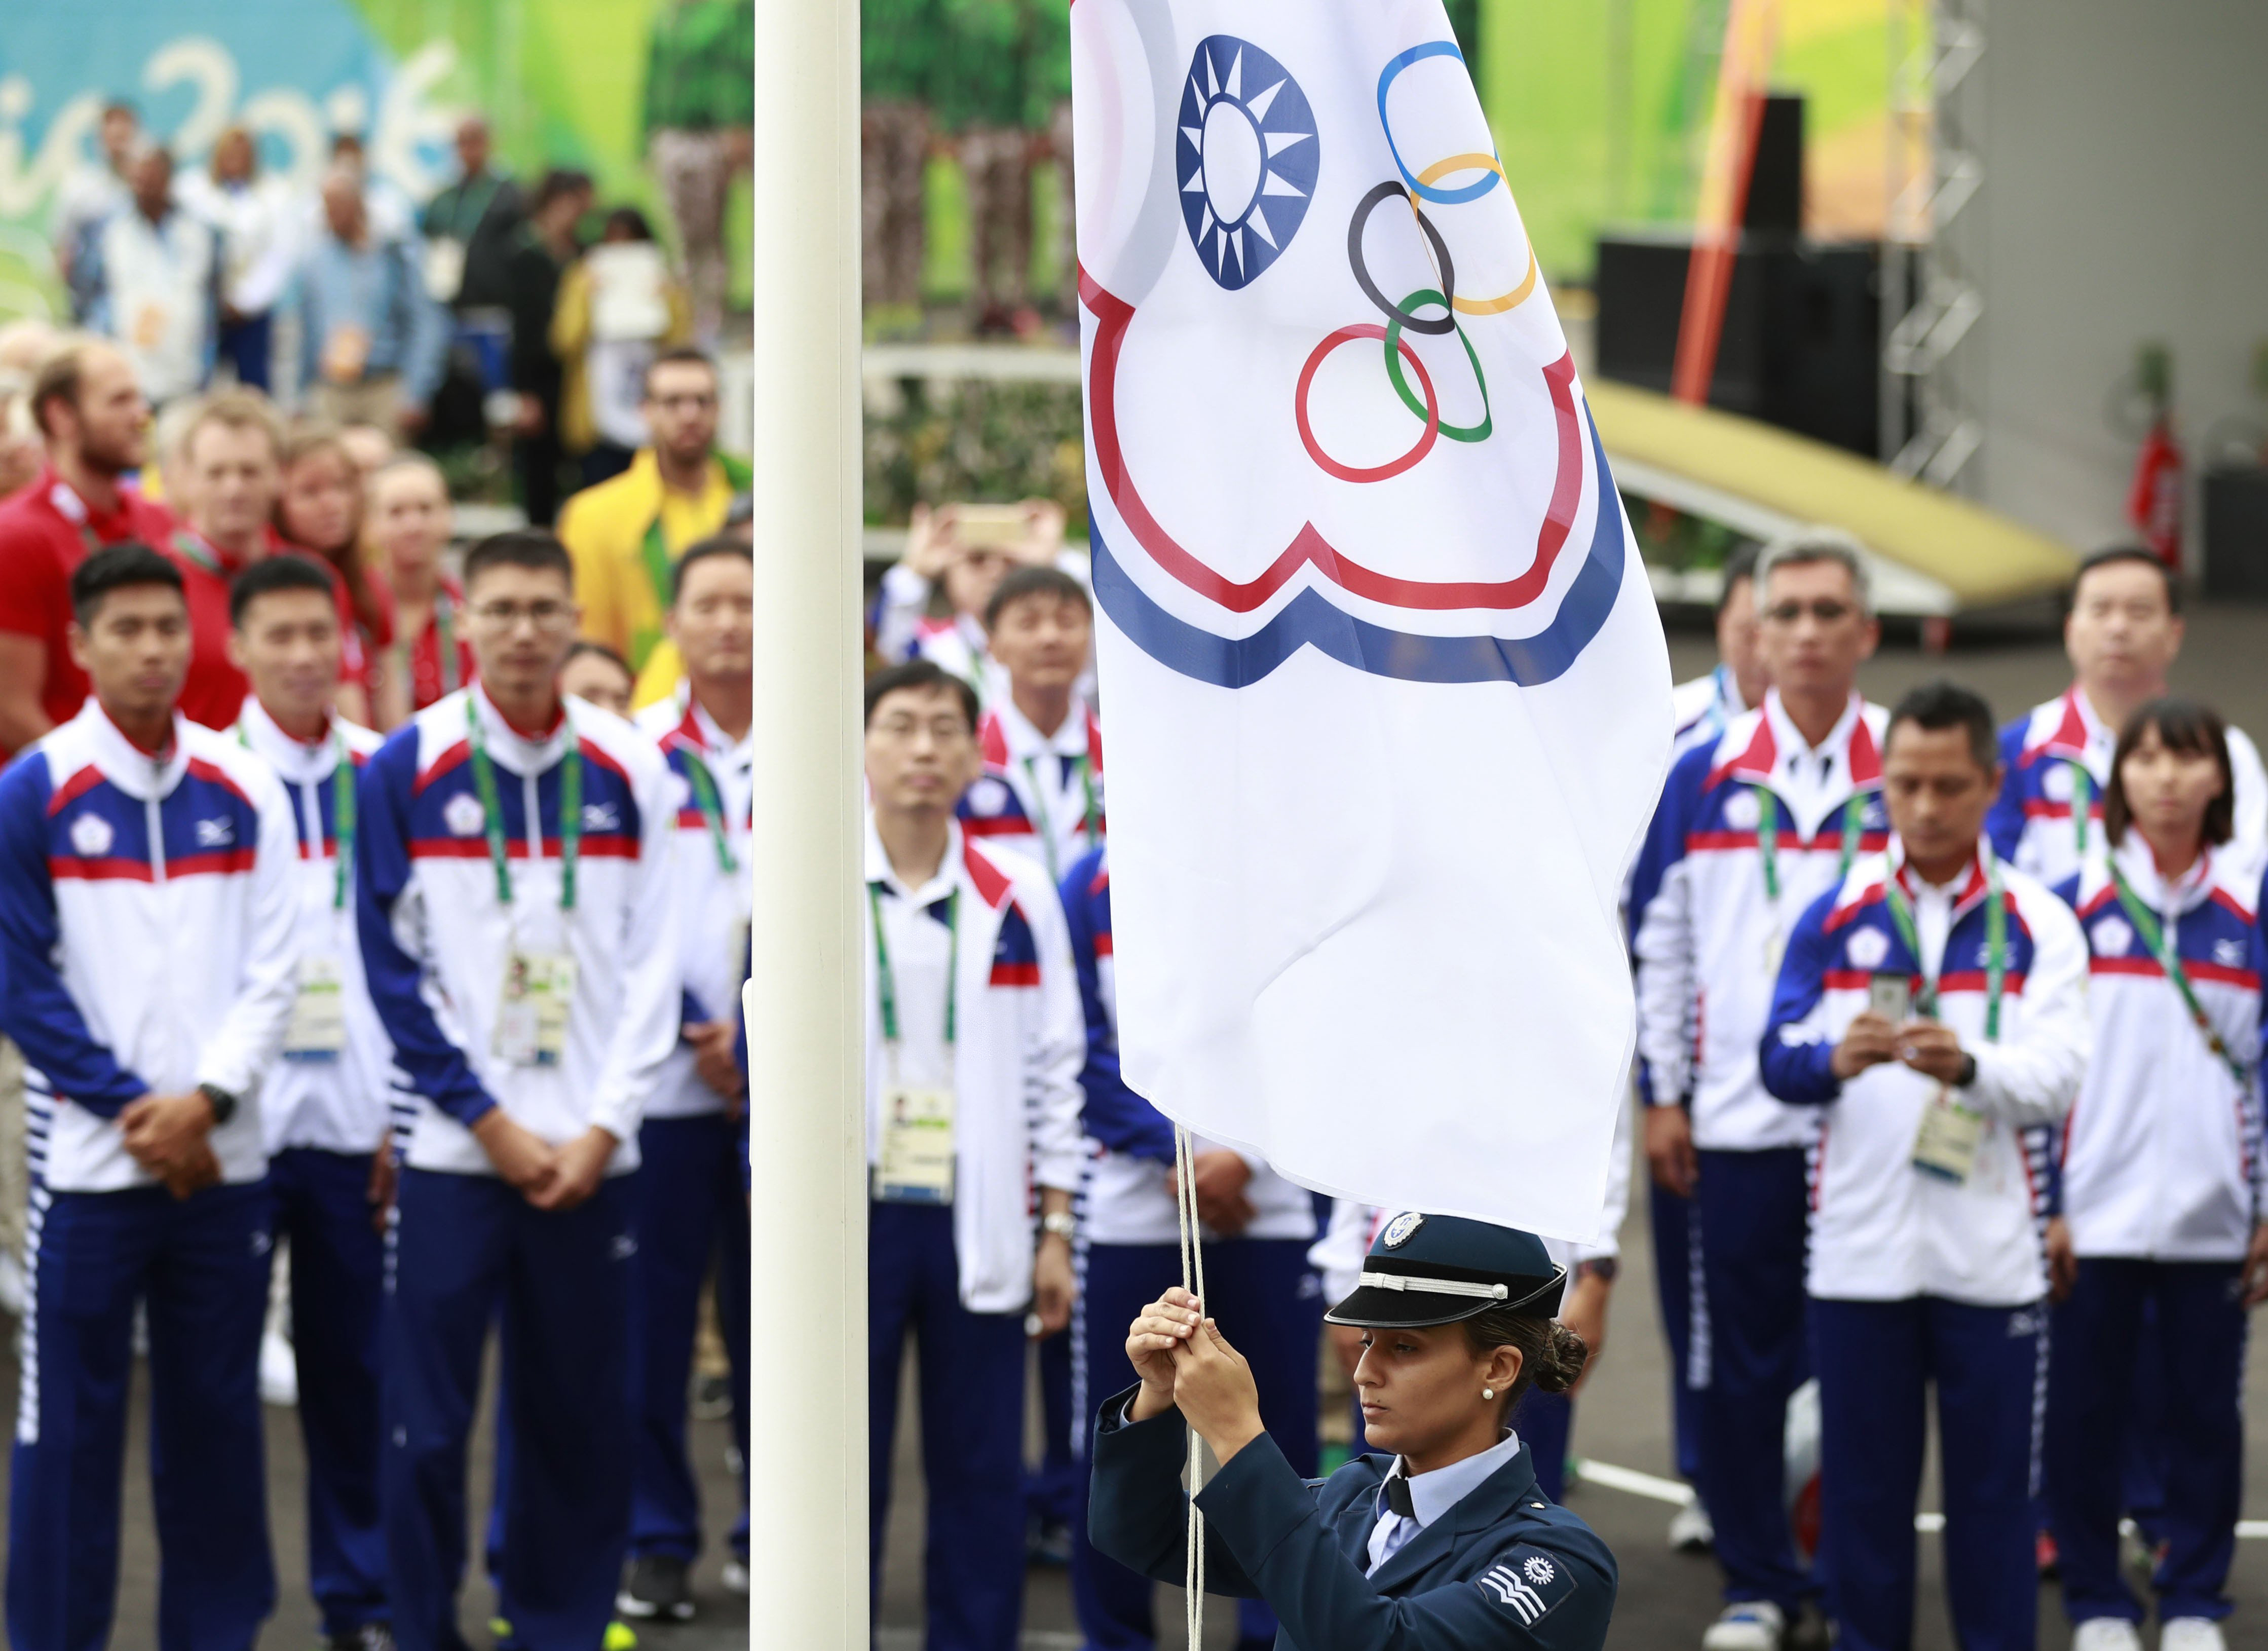 The Taiwanese delegation to the Rio 2016 Olympic Games, competing as Chinese Taipei,  attends the flag-raising ceremony at the Olympic Village in Rio de Janeiro on Aug. 3, 2016 (Xinhua News Agency/Getty Images)